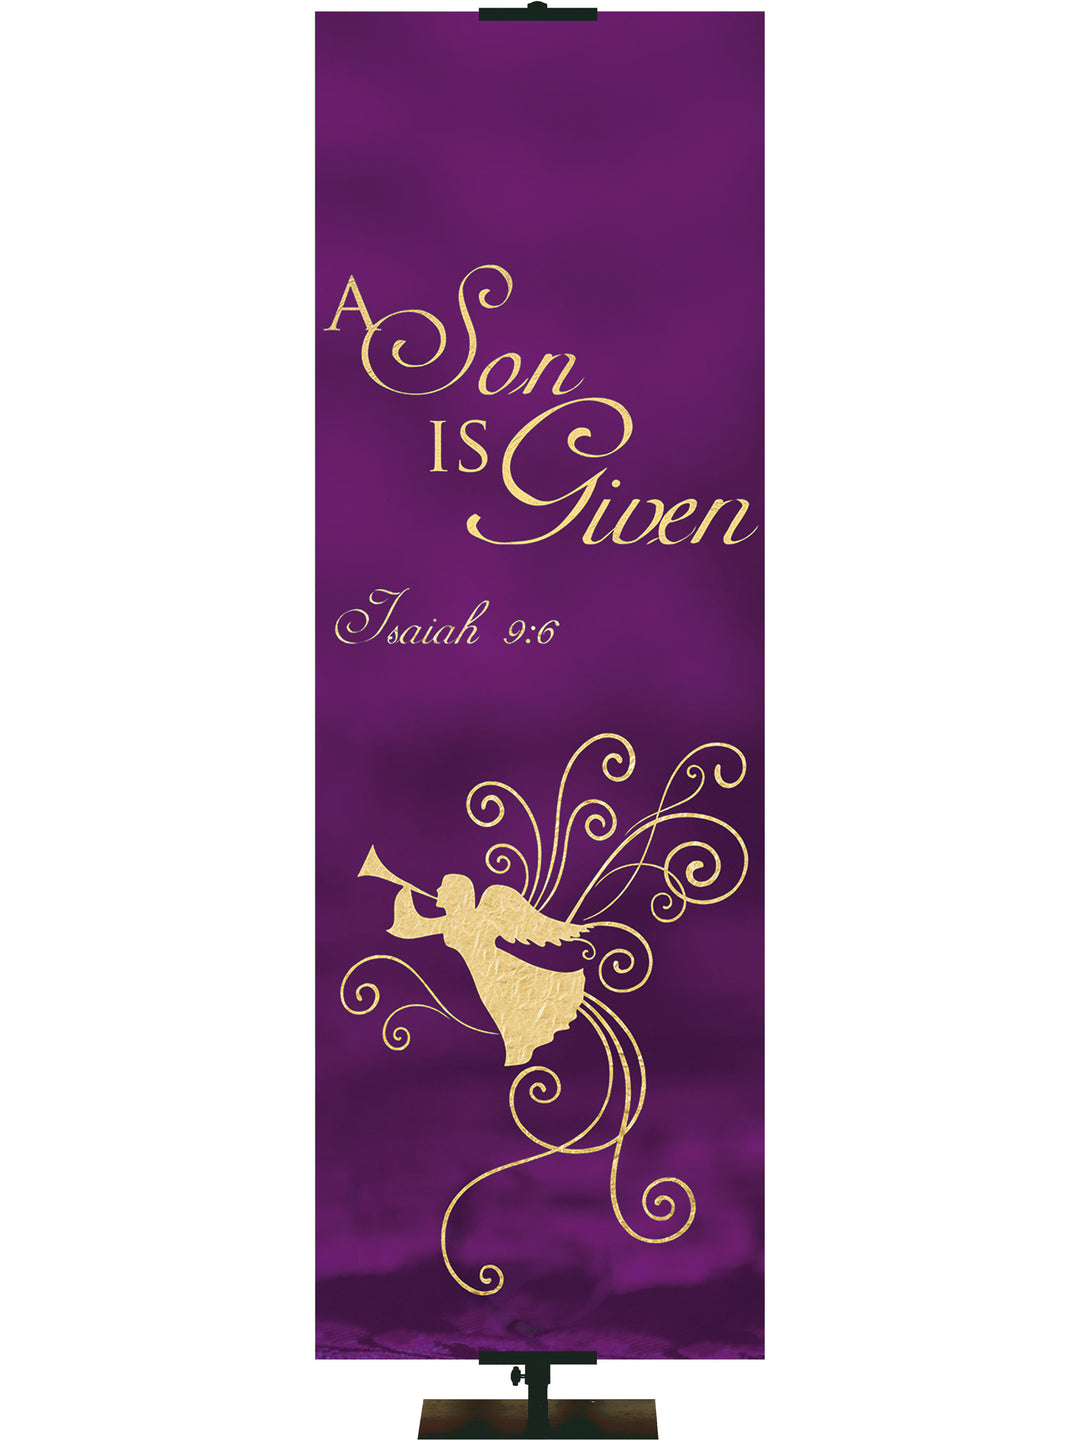 Christmas Foil A Son is Given - Christmas Banners - PraiseBanners